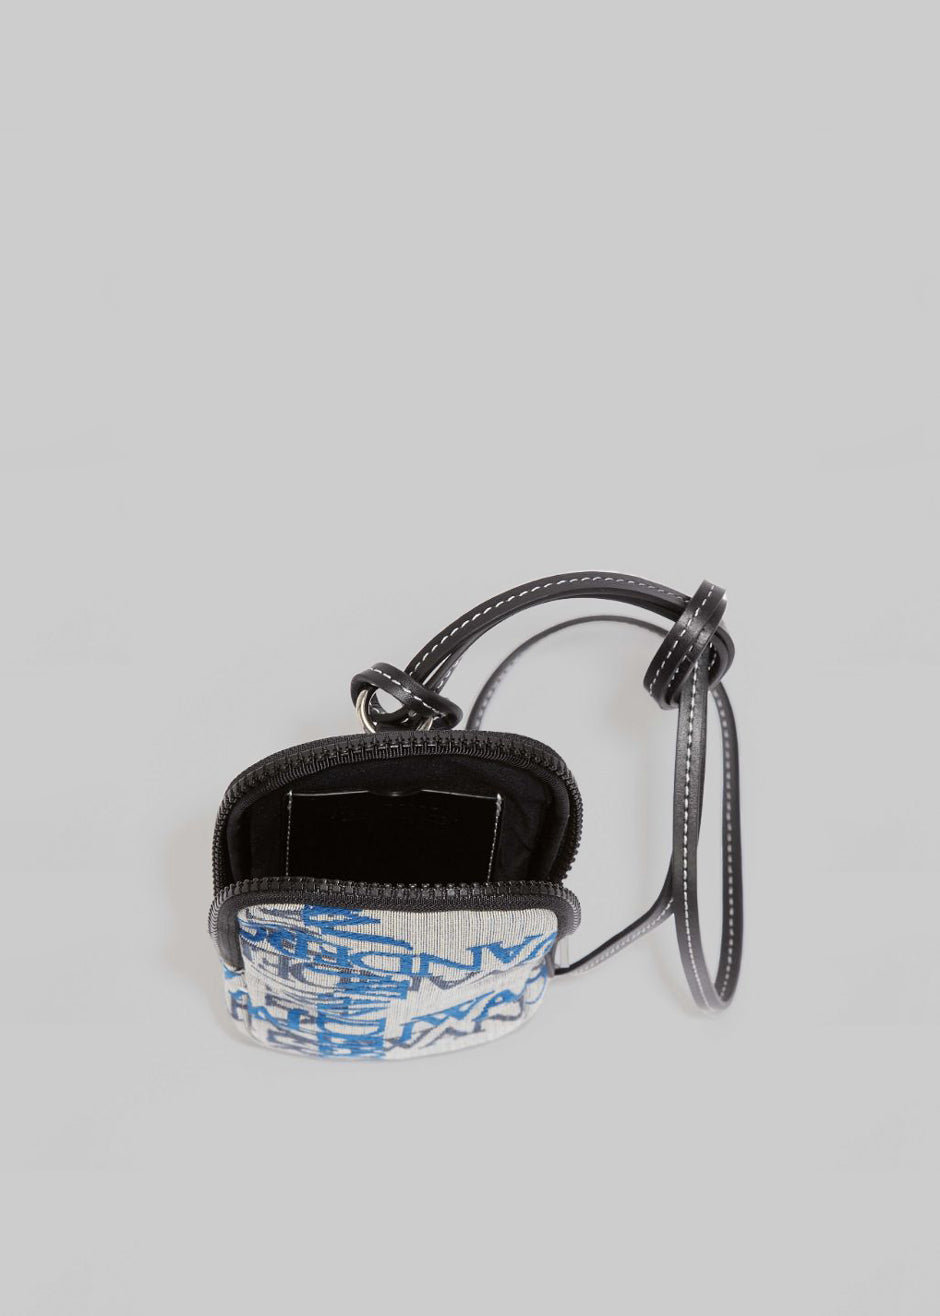 JW Anderson Phone Pouch With Strap - Off White/Blue - 4